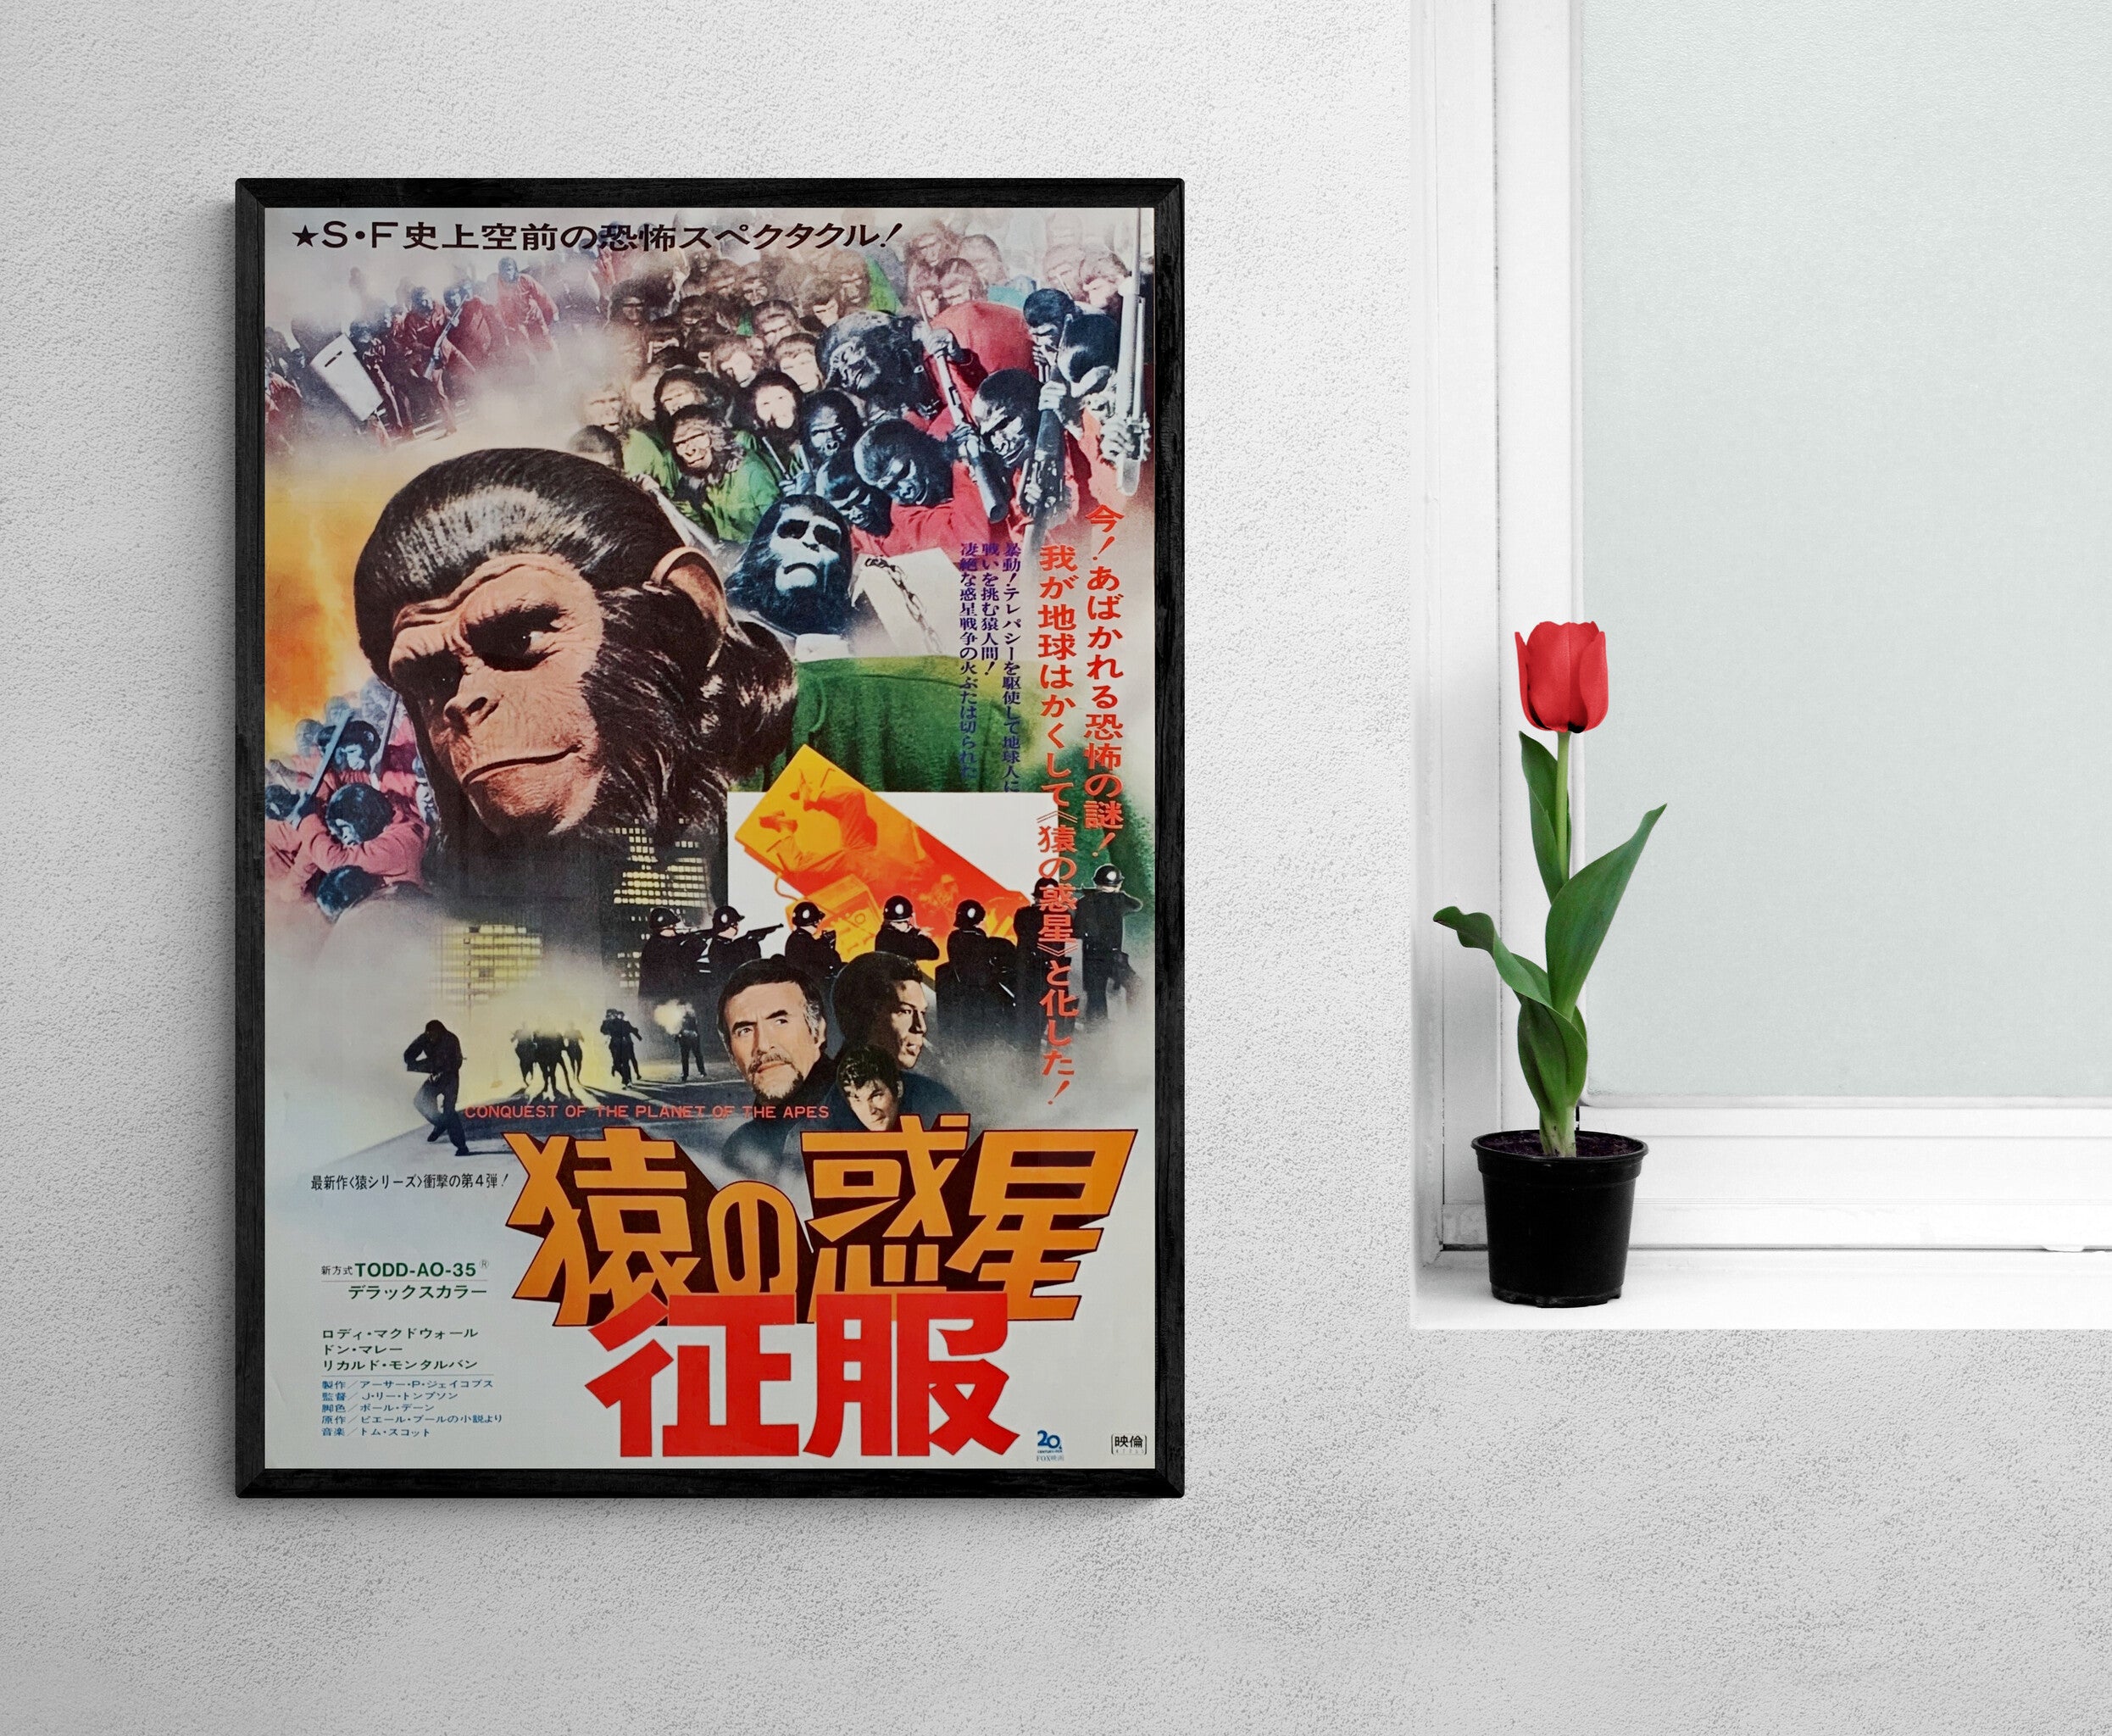 planet of the apes 2022 poster